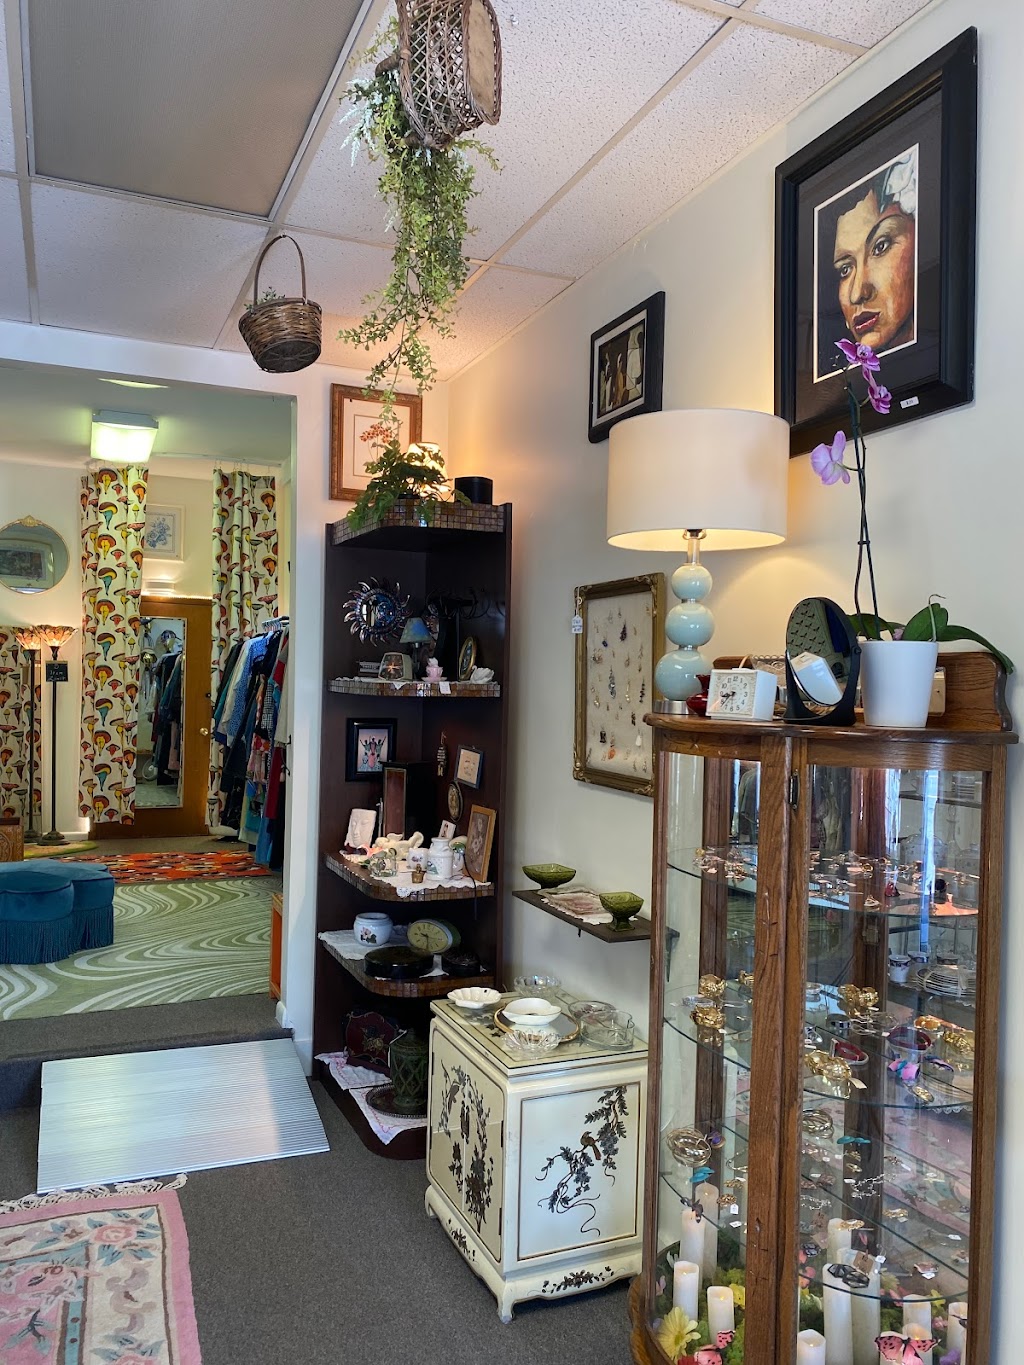 Pretty Oddities | 620 North St, Middletown, NY 10940, USA | Phone: (845) 394-0038